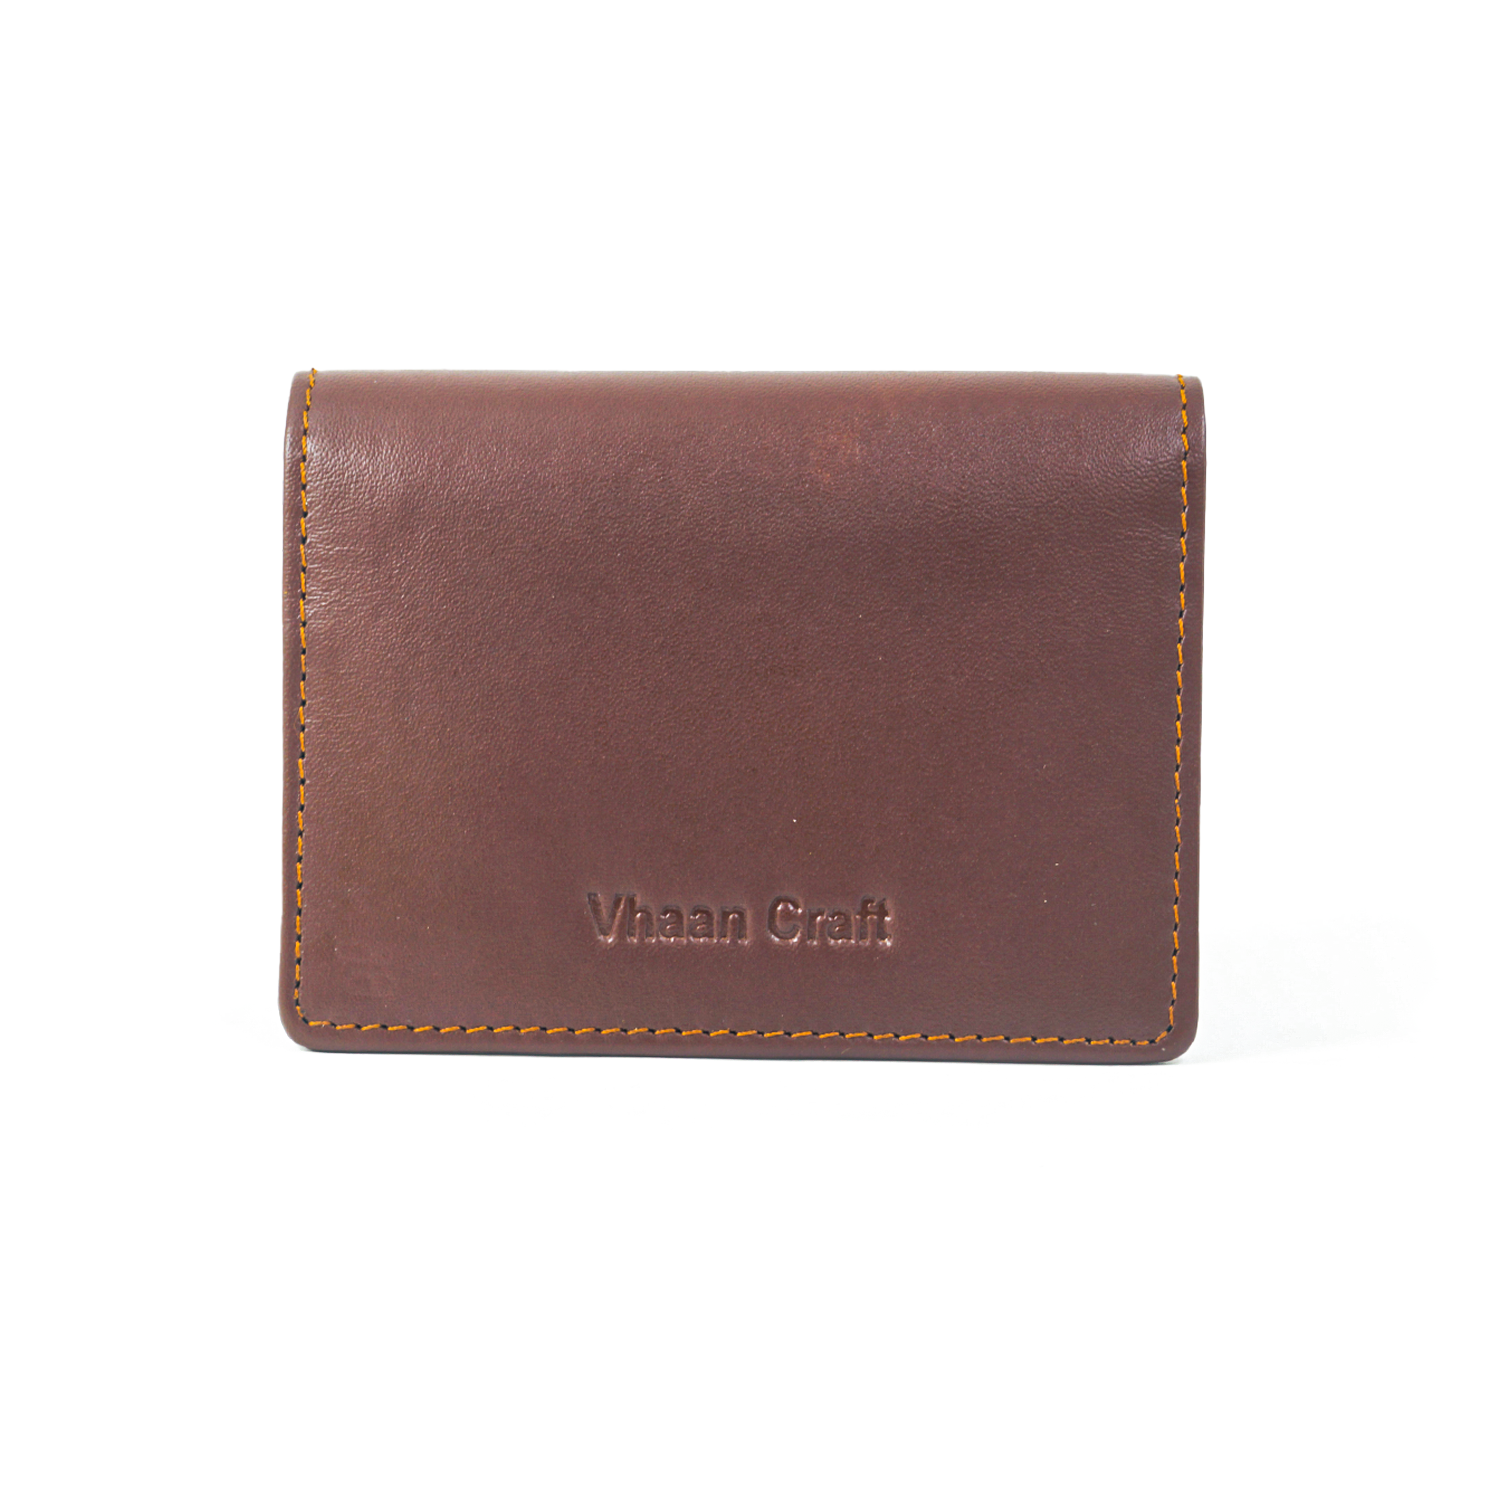 Premium Leather Card Holder with Protective Cover by Vhaan